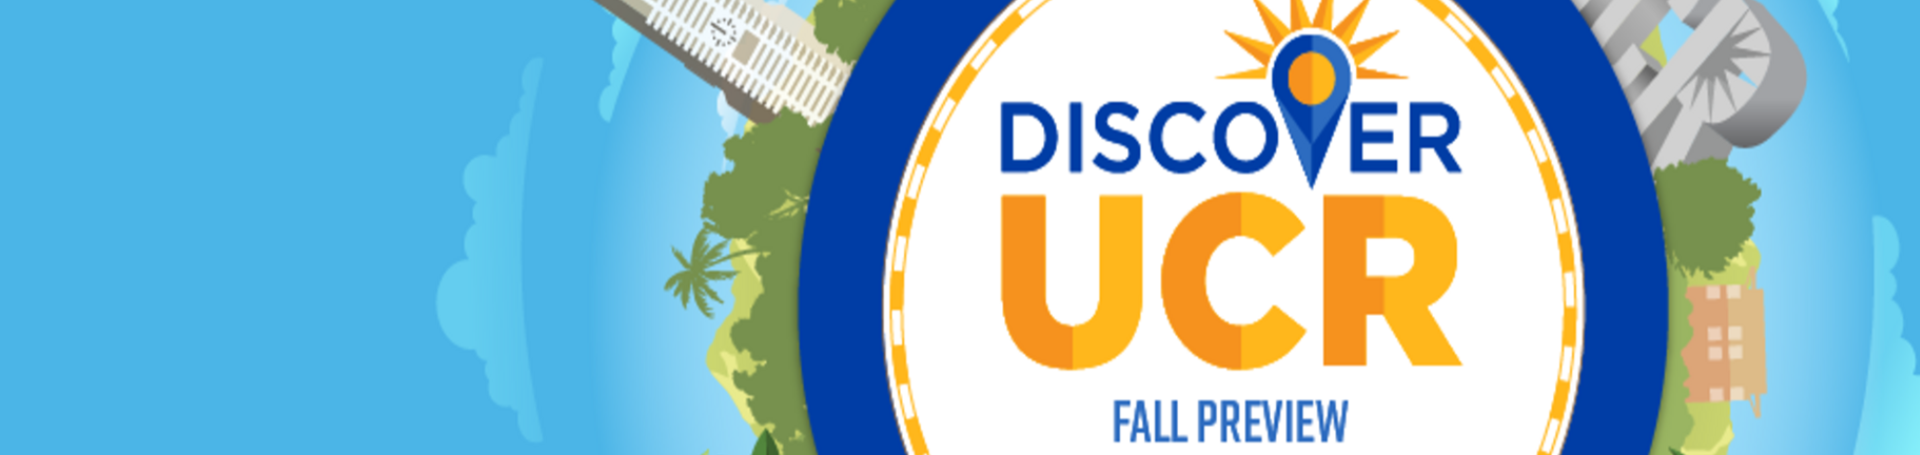 Discover UCR Fall Preview